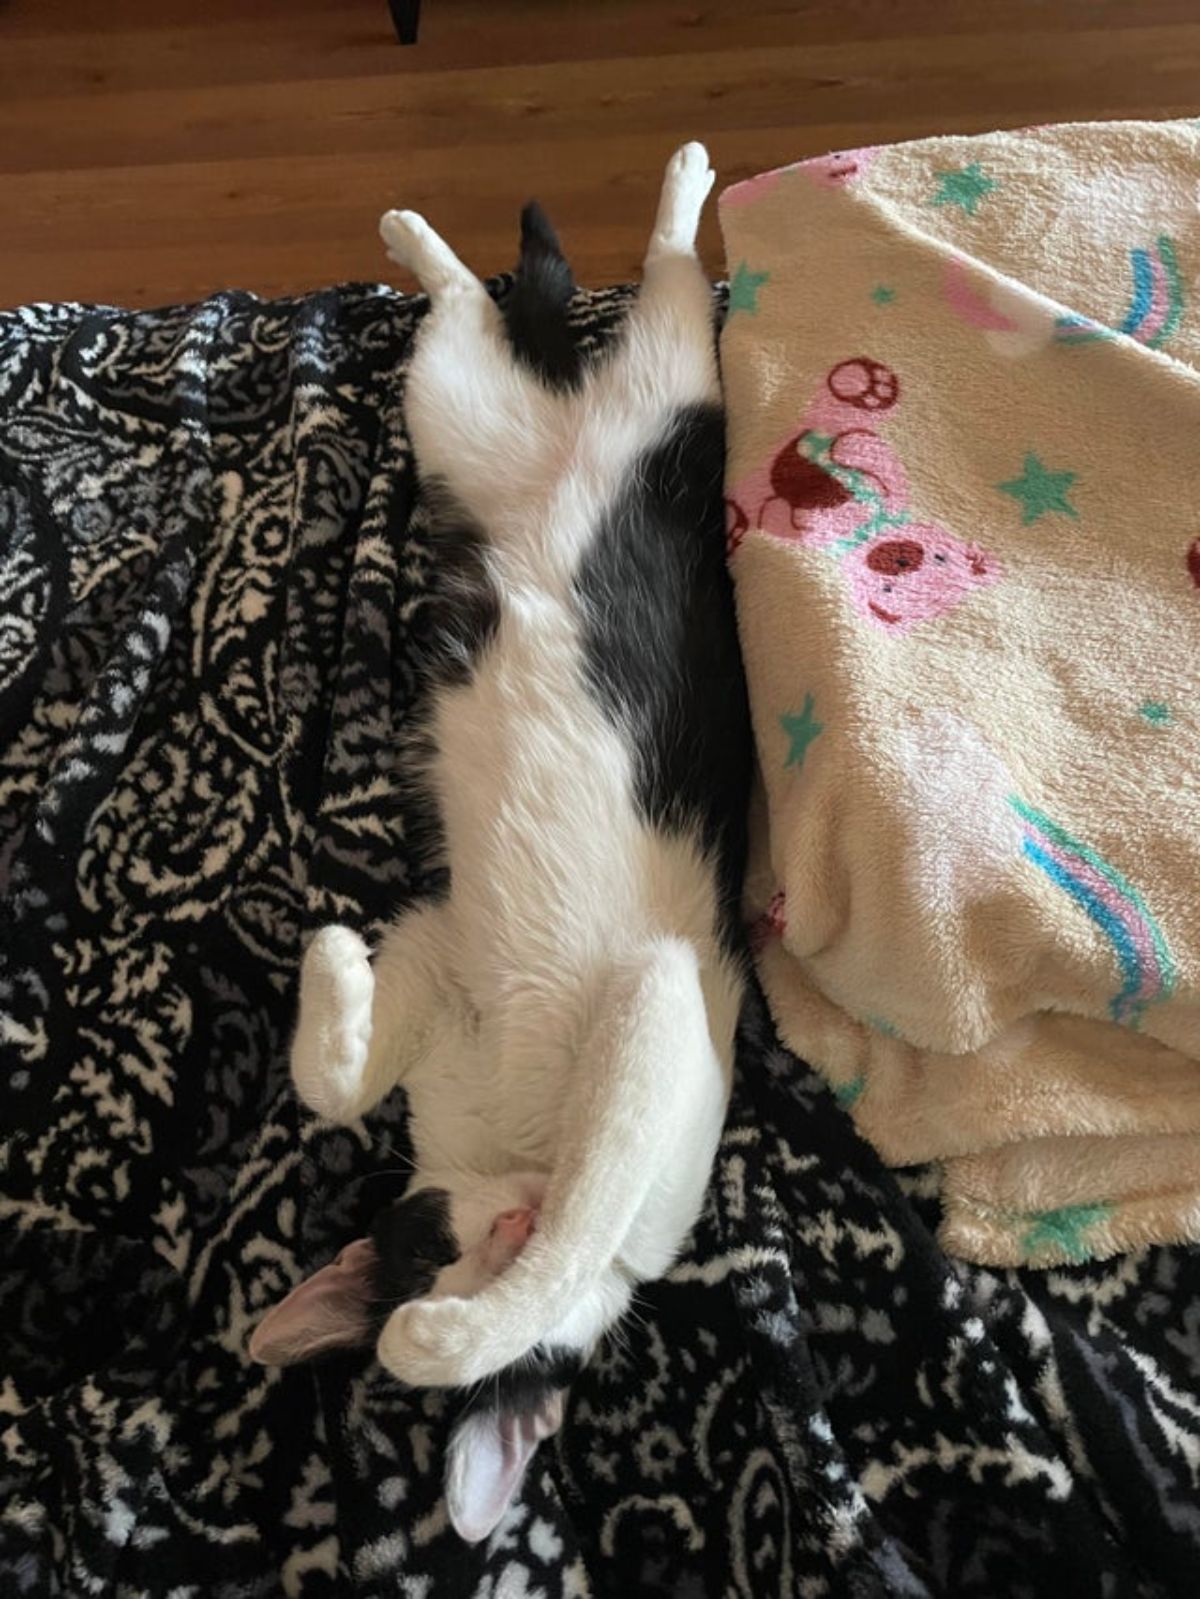 black and white cat sleeping belly up on blankets with right front leg covering the right eye